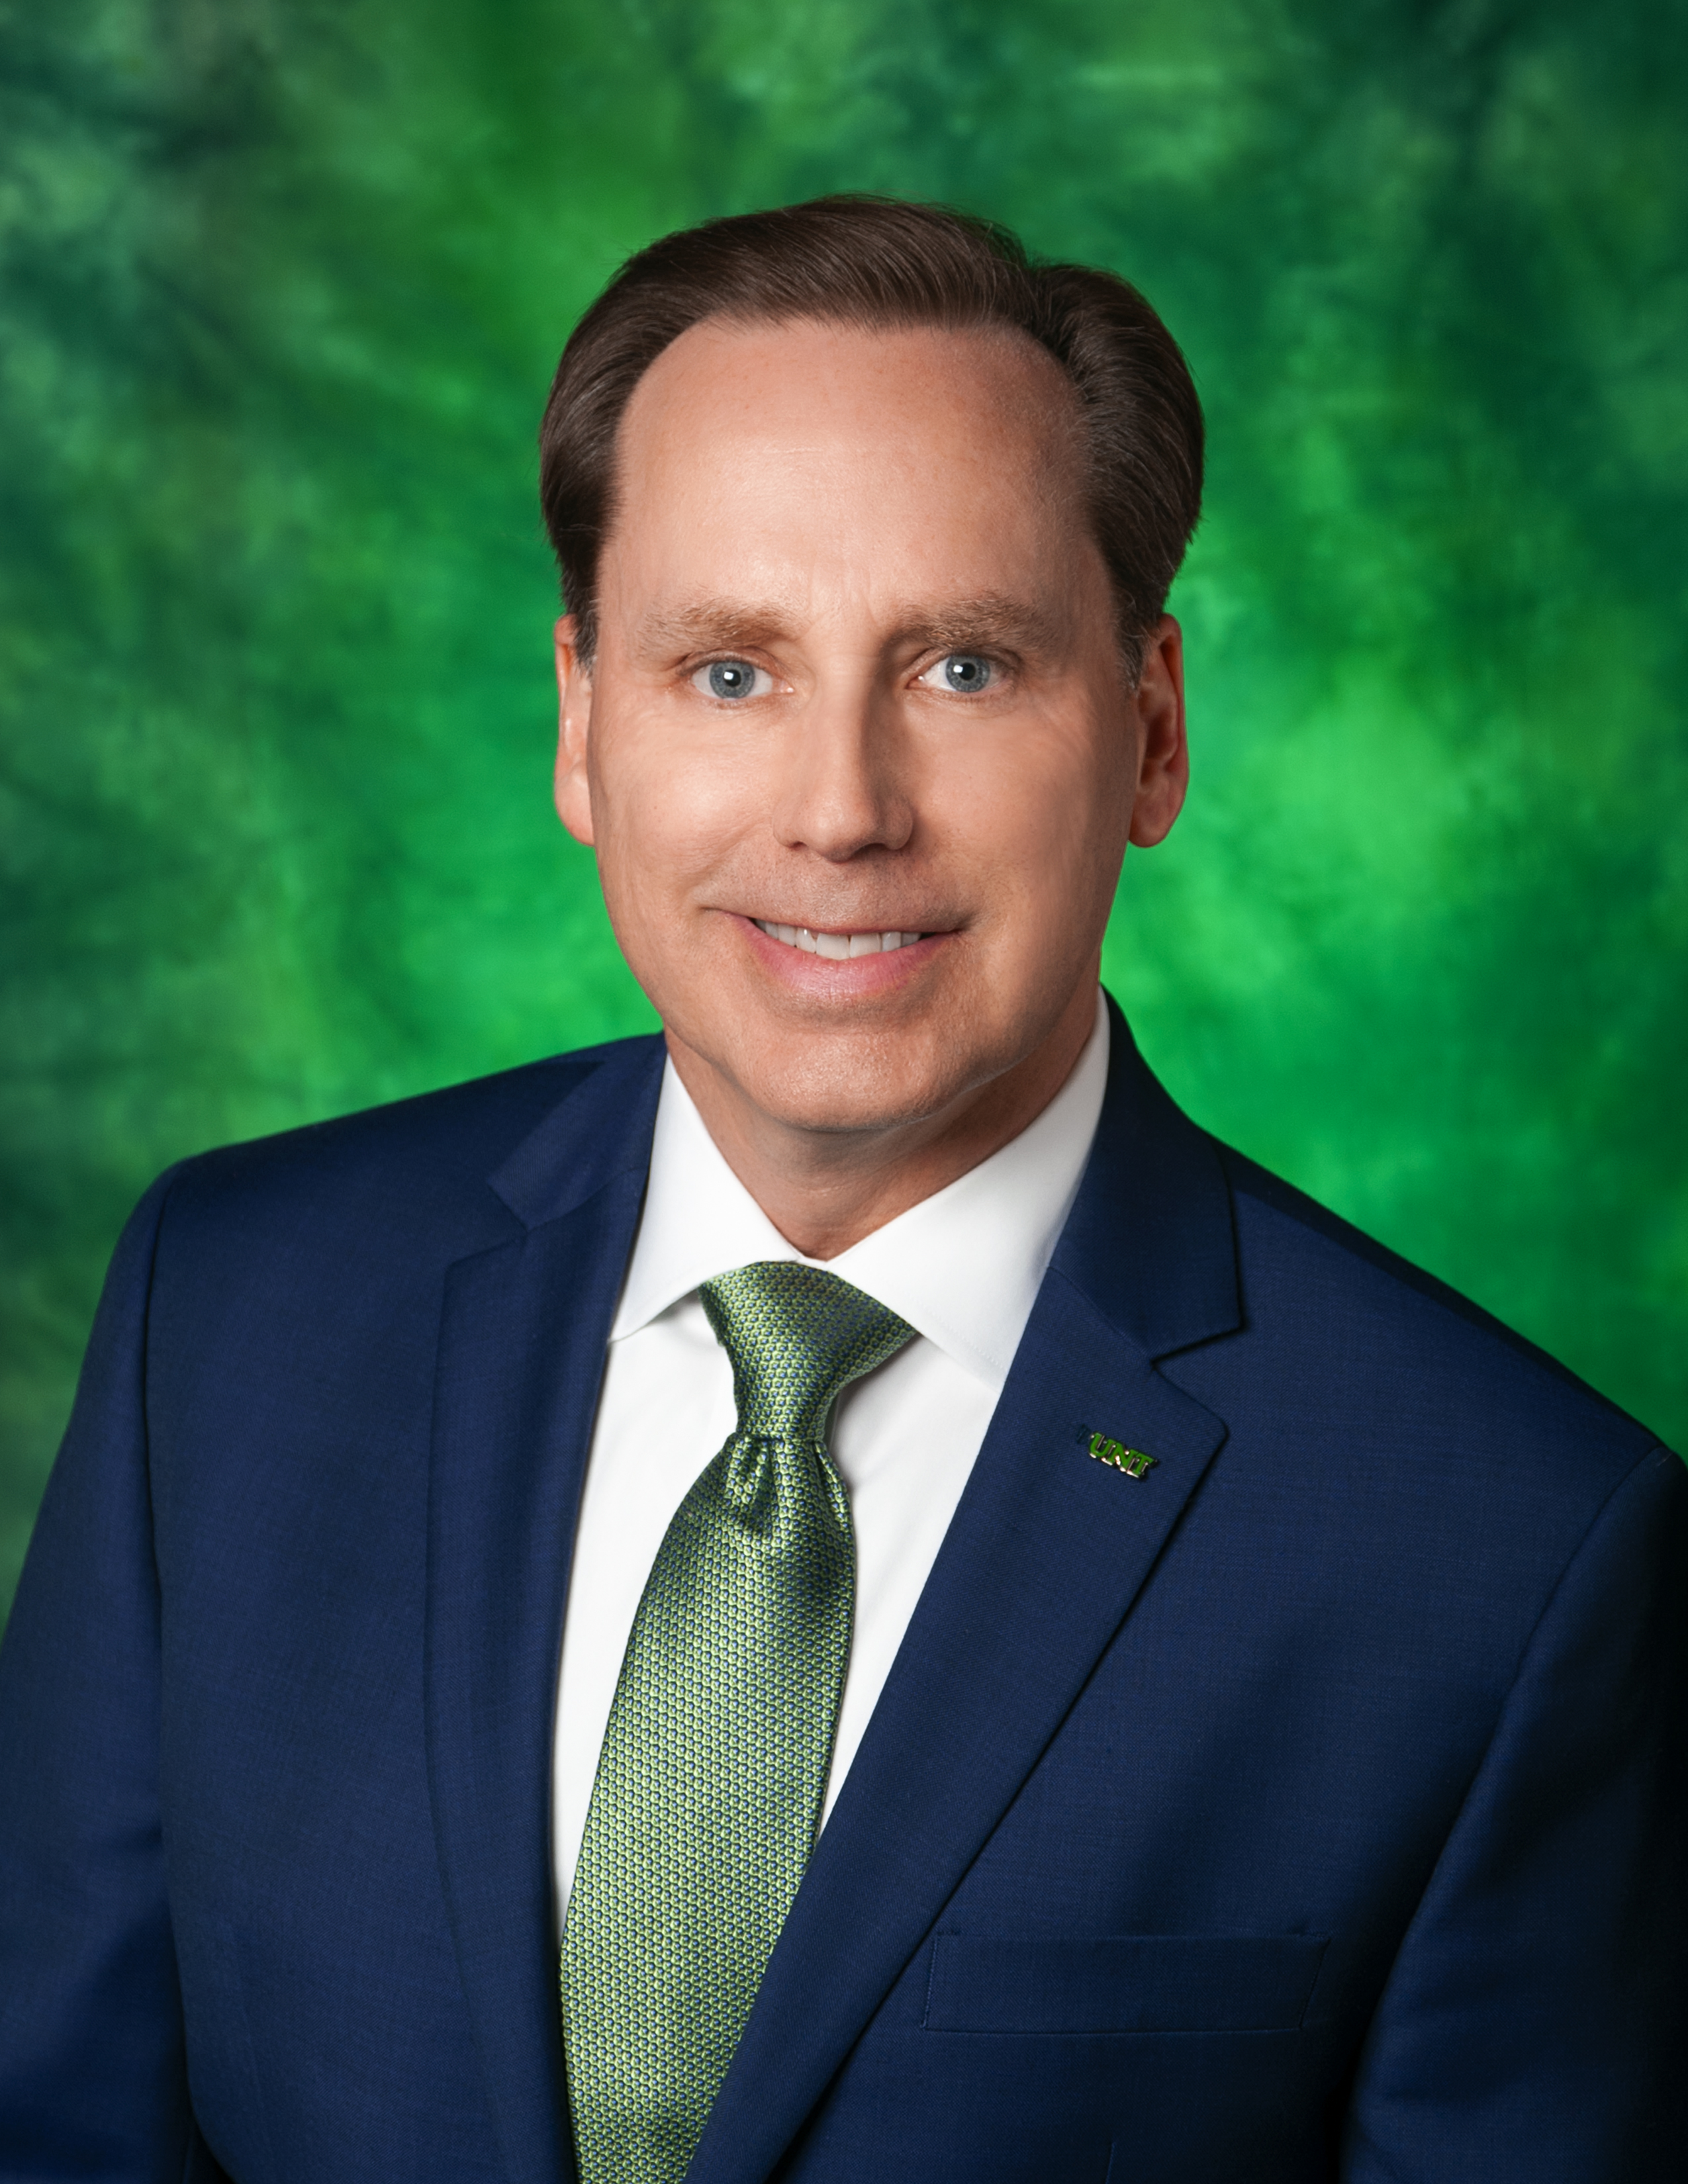 James Berscheidt named vice president for marketing and communications at UNT